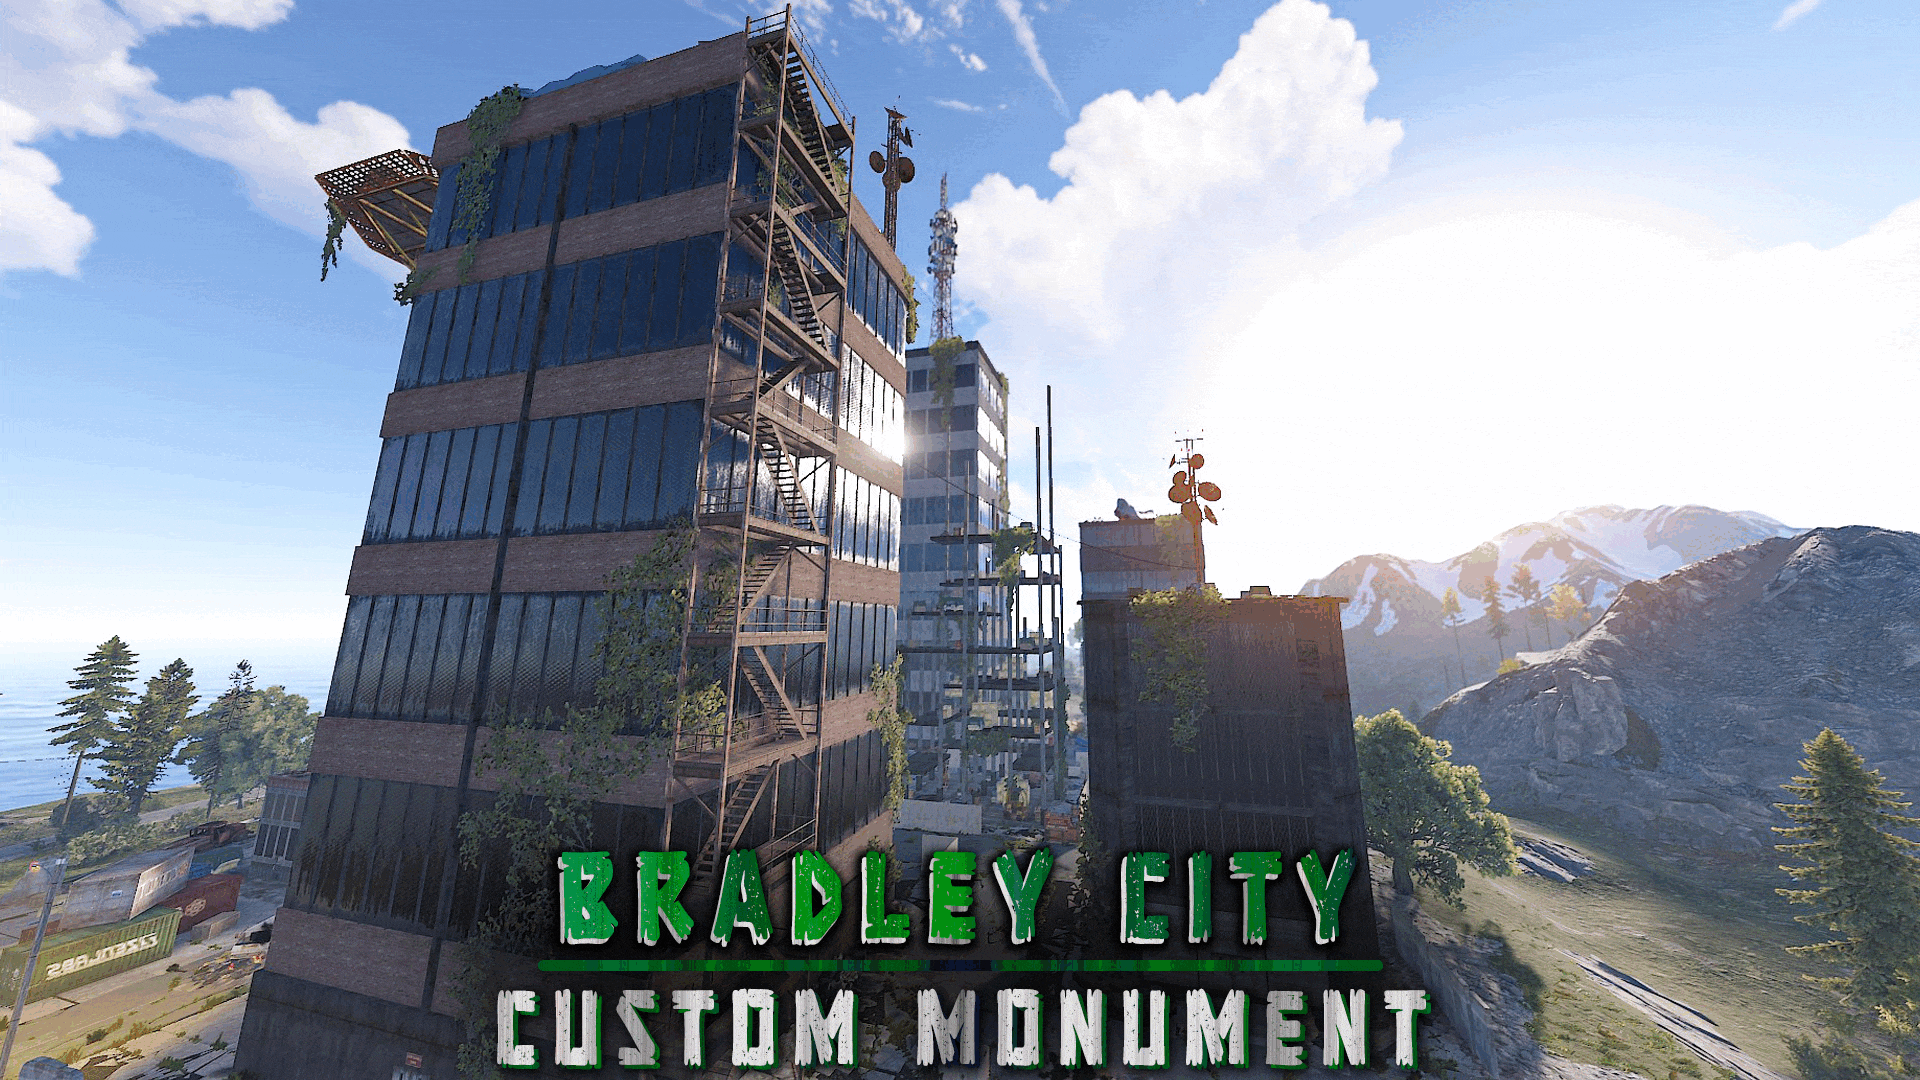 More information about "Bradley City"